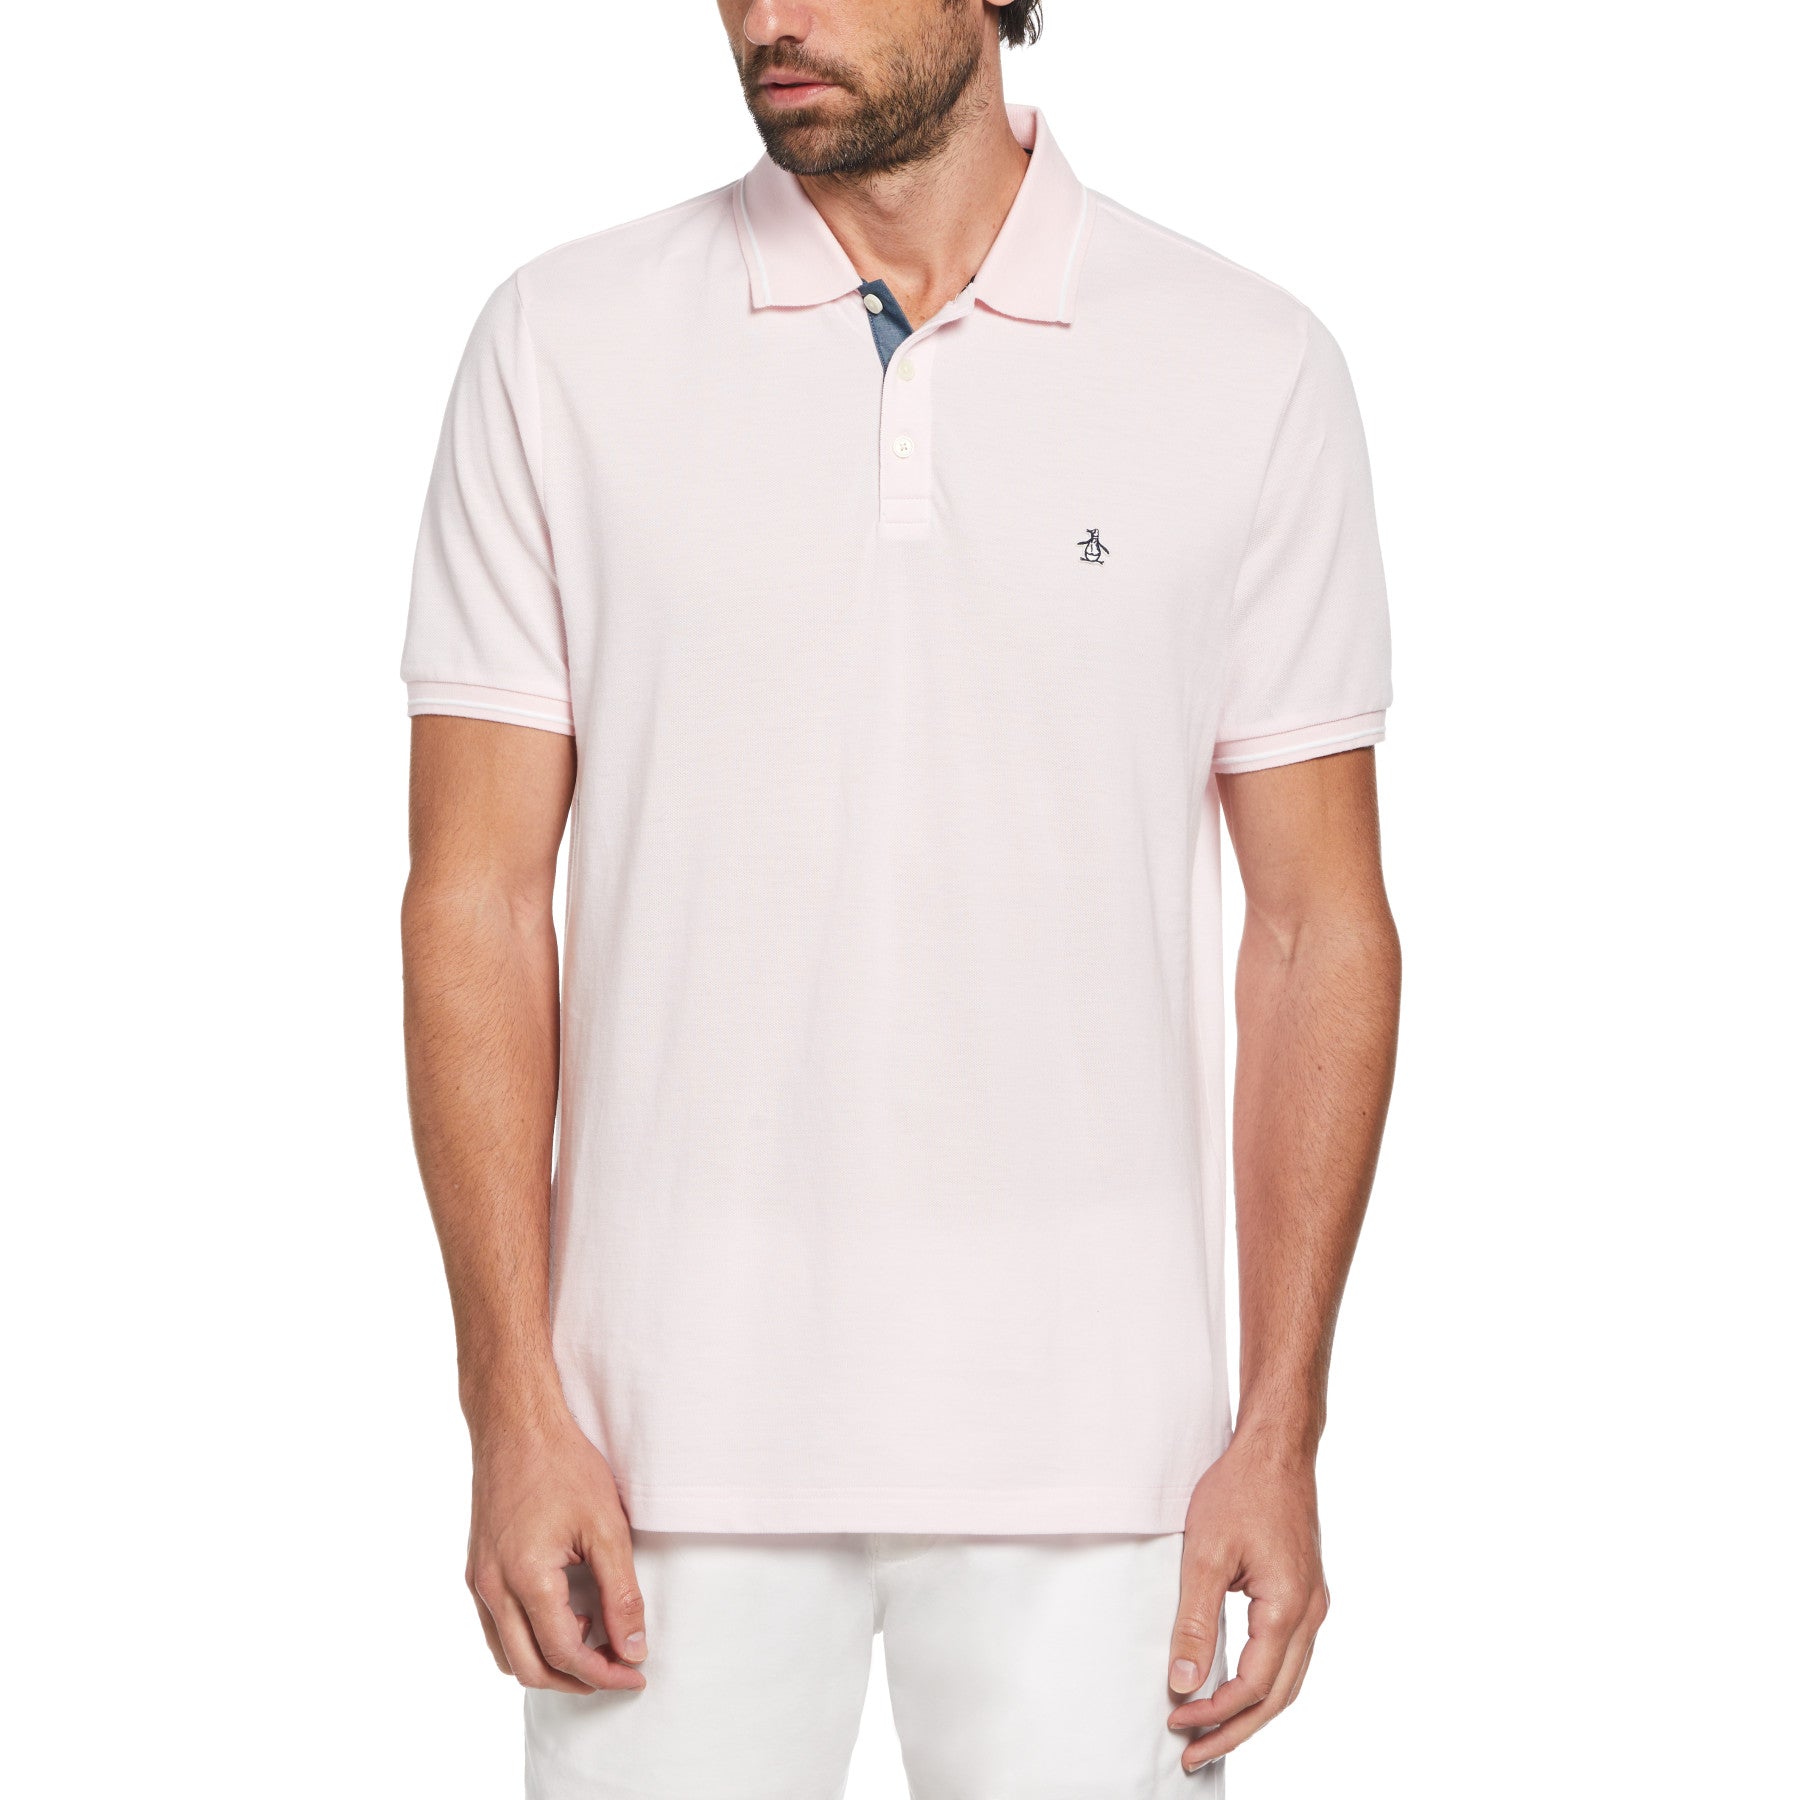 View Cotton Birdseye Pique Tipped Polo Shirt In Parfait Pink information